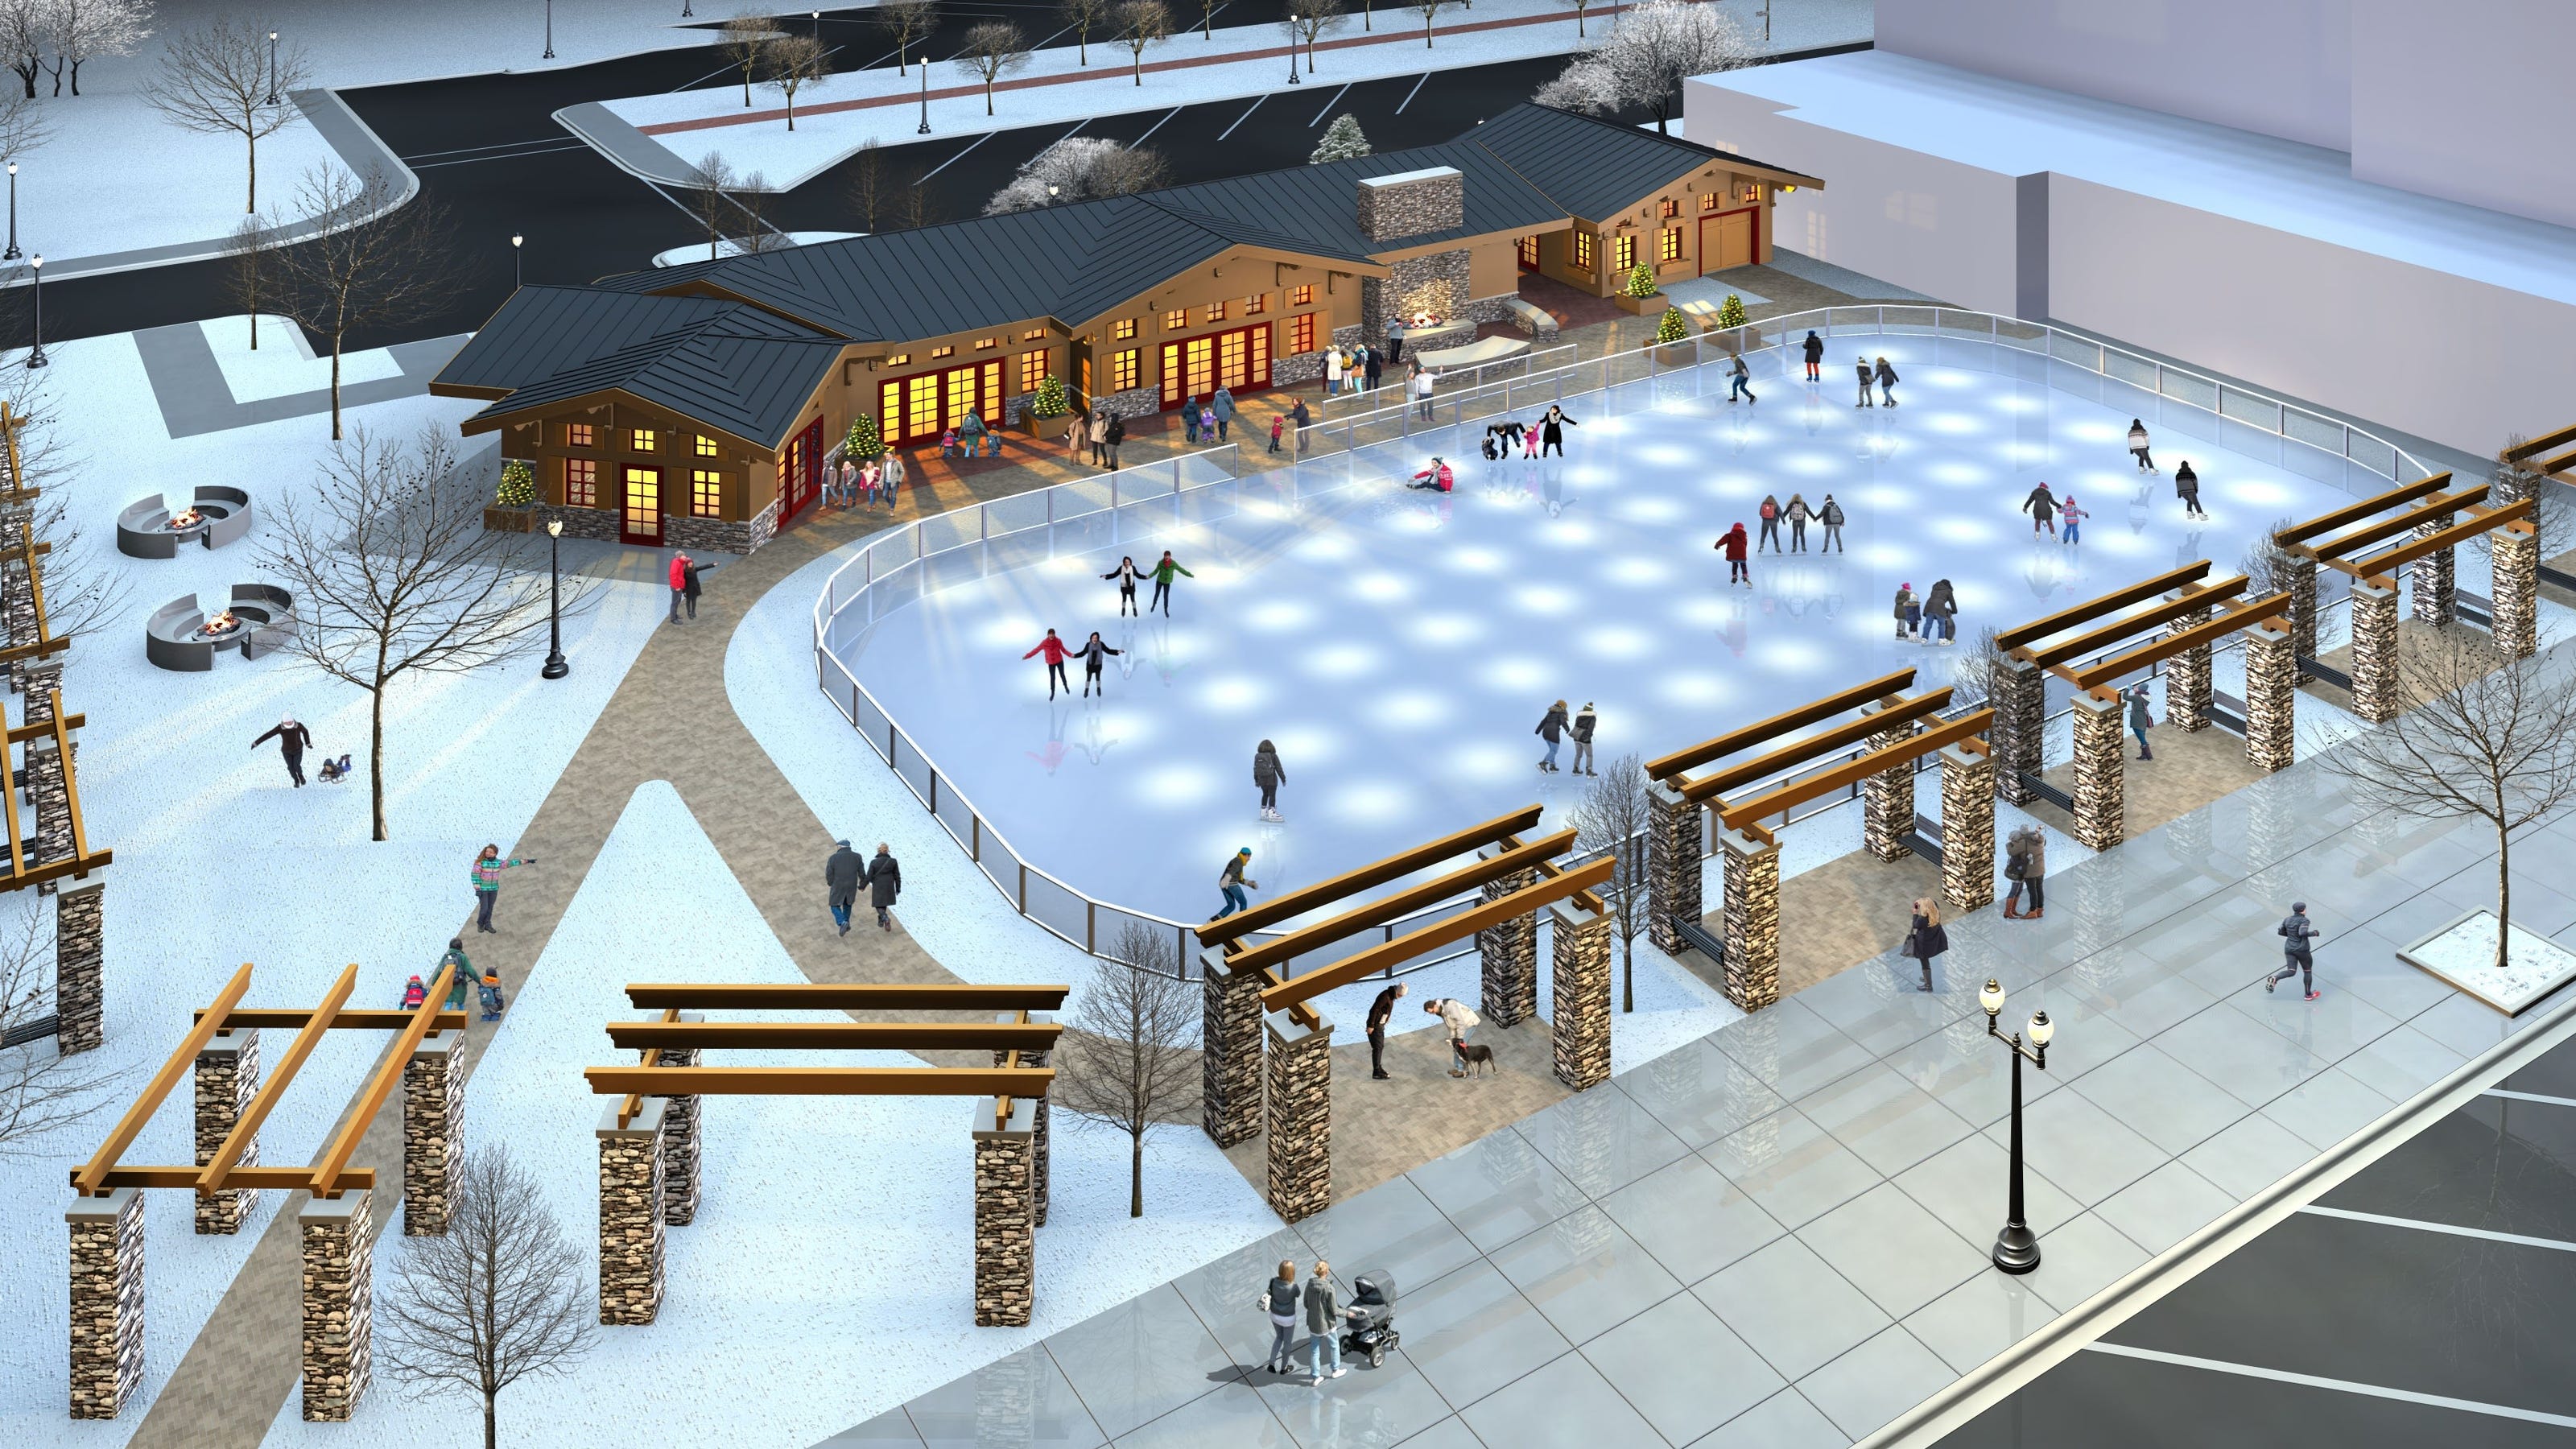 Bergstrom group will give $4 million to $5 million ice rink to Neenah